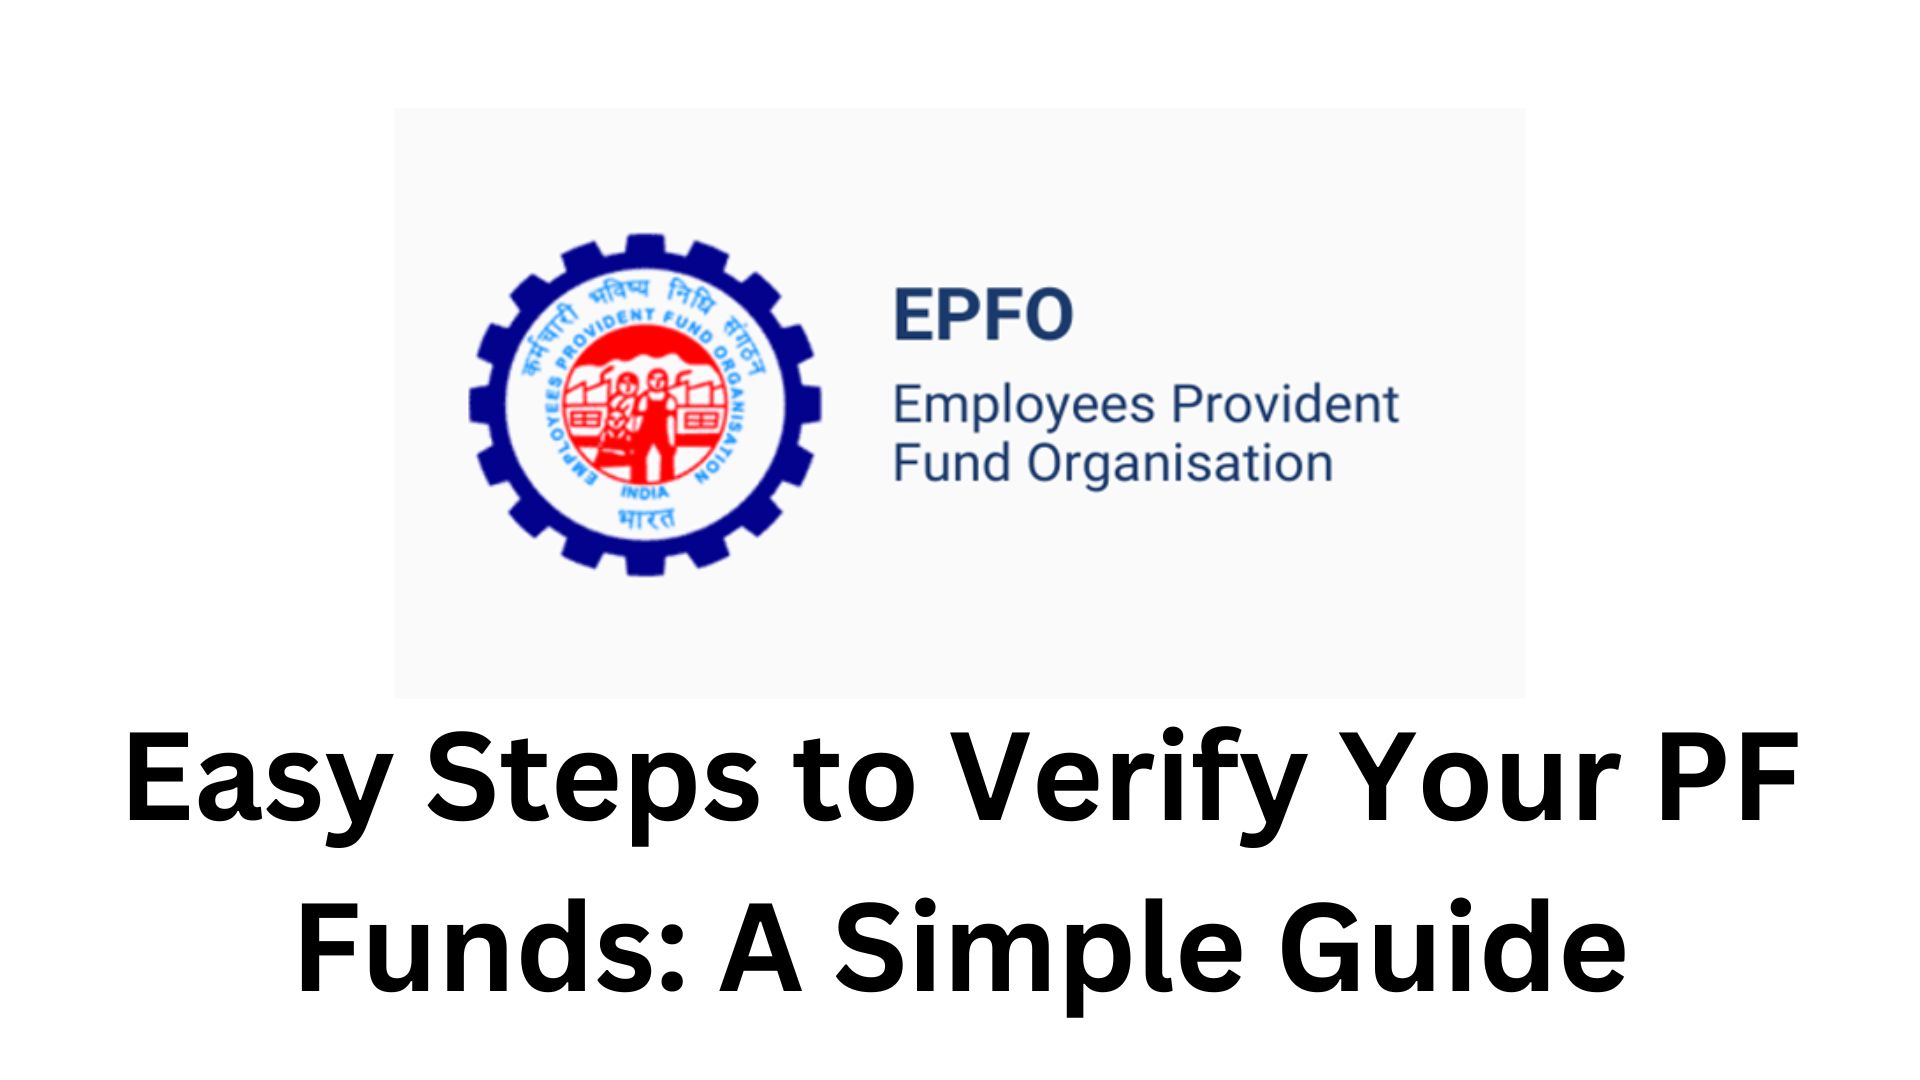 Easy Steps to Verify Your PF Funds: A Simple Guide